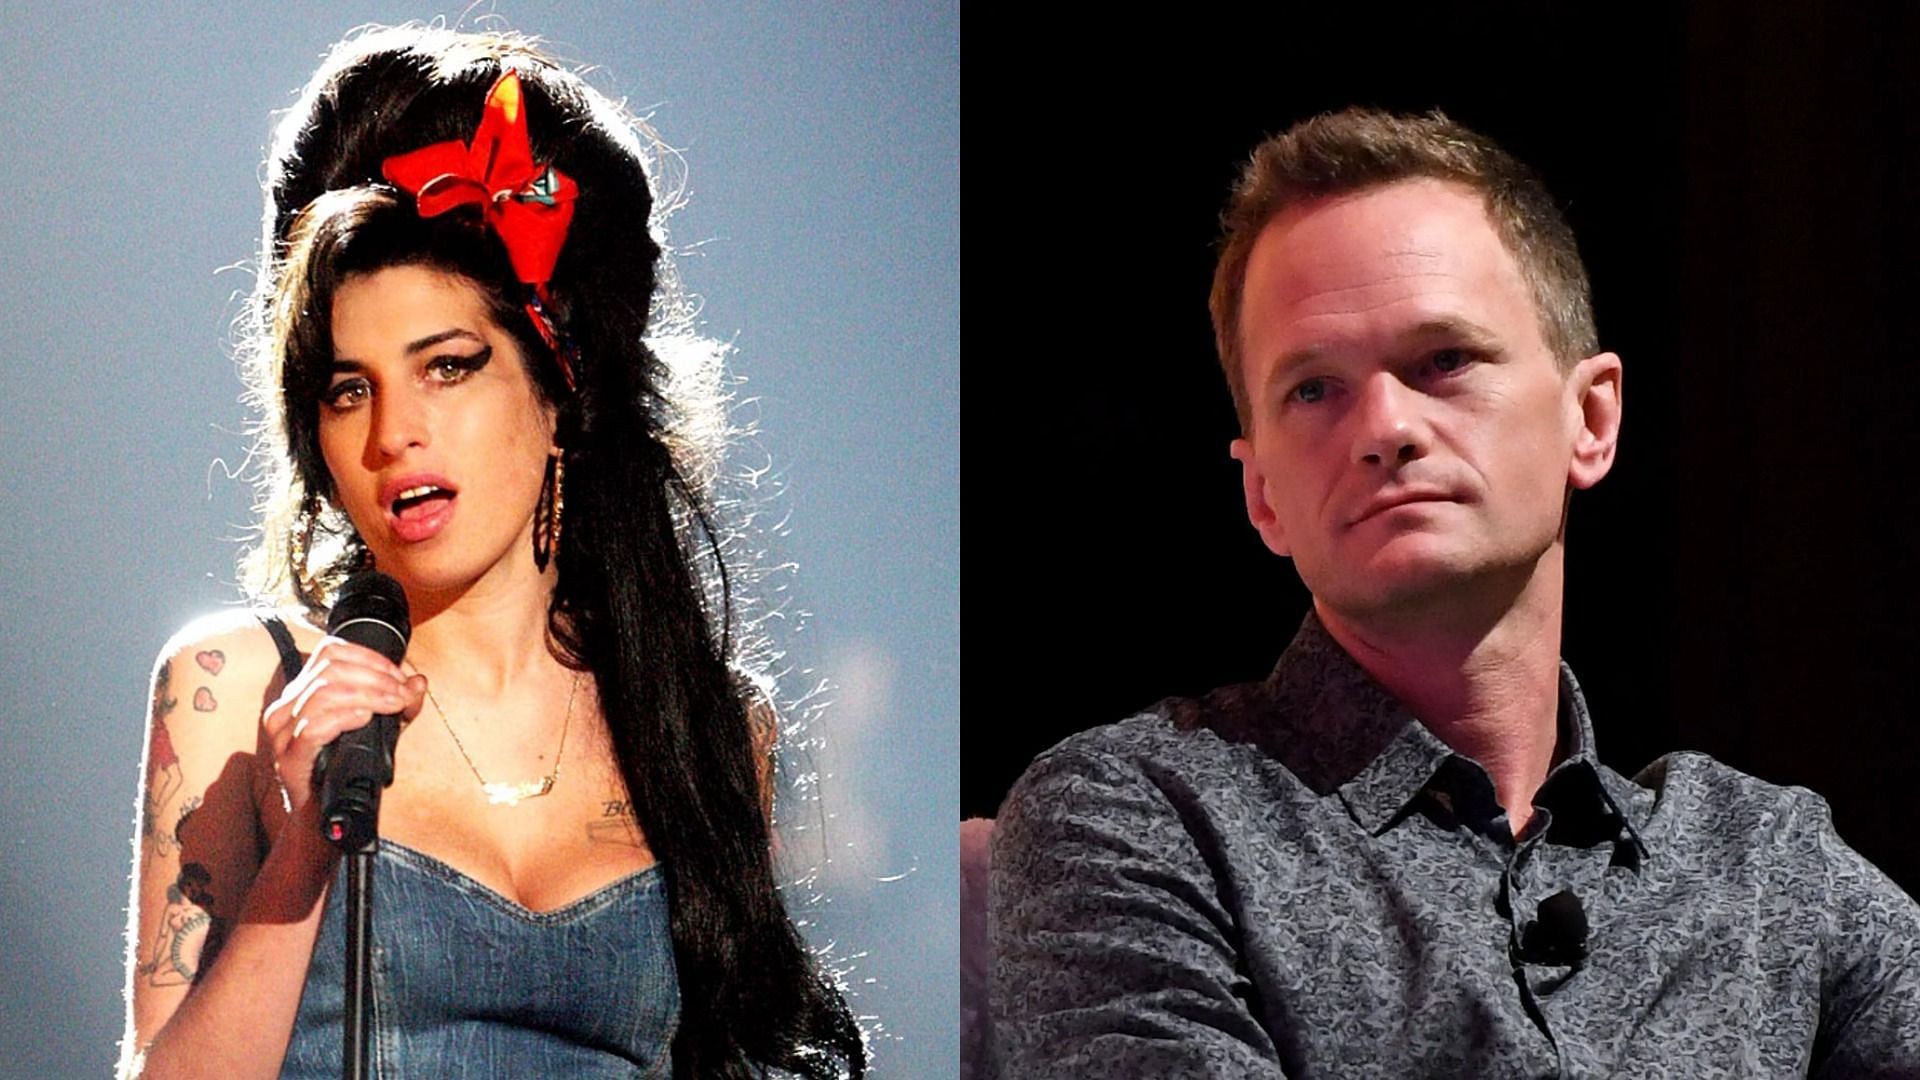 Neil Patrick Harris had a meat platter that appeared to be the corpse of late singer Amy Winehouse, at his Halloween party three months after she passed away in 2011. (Image via Getty Images/Staff/Ethan Miller)